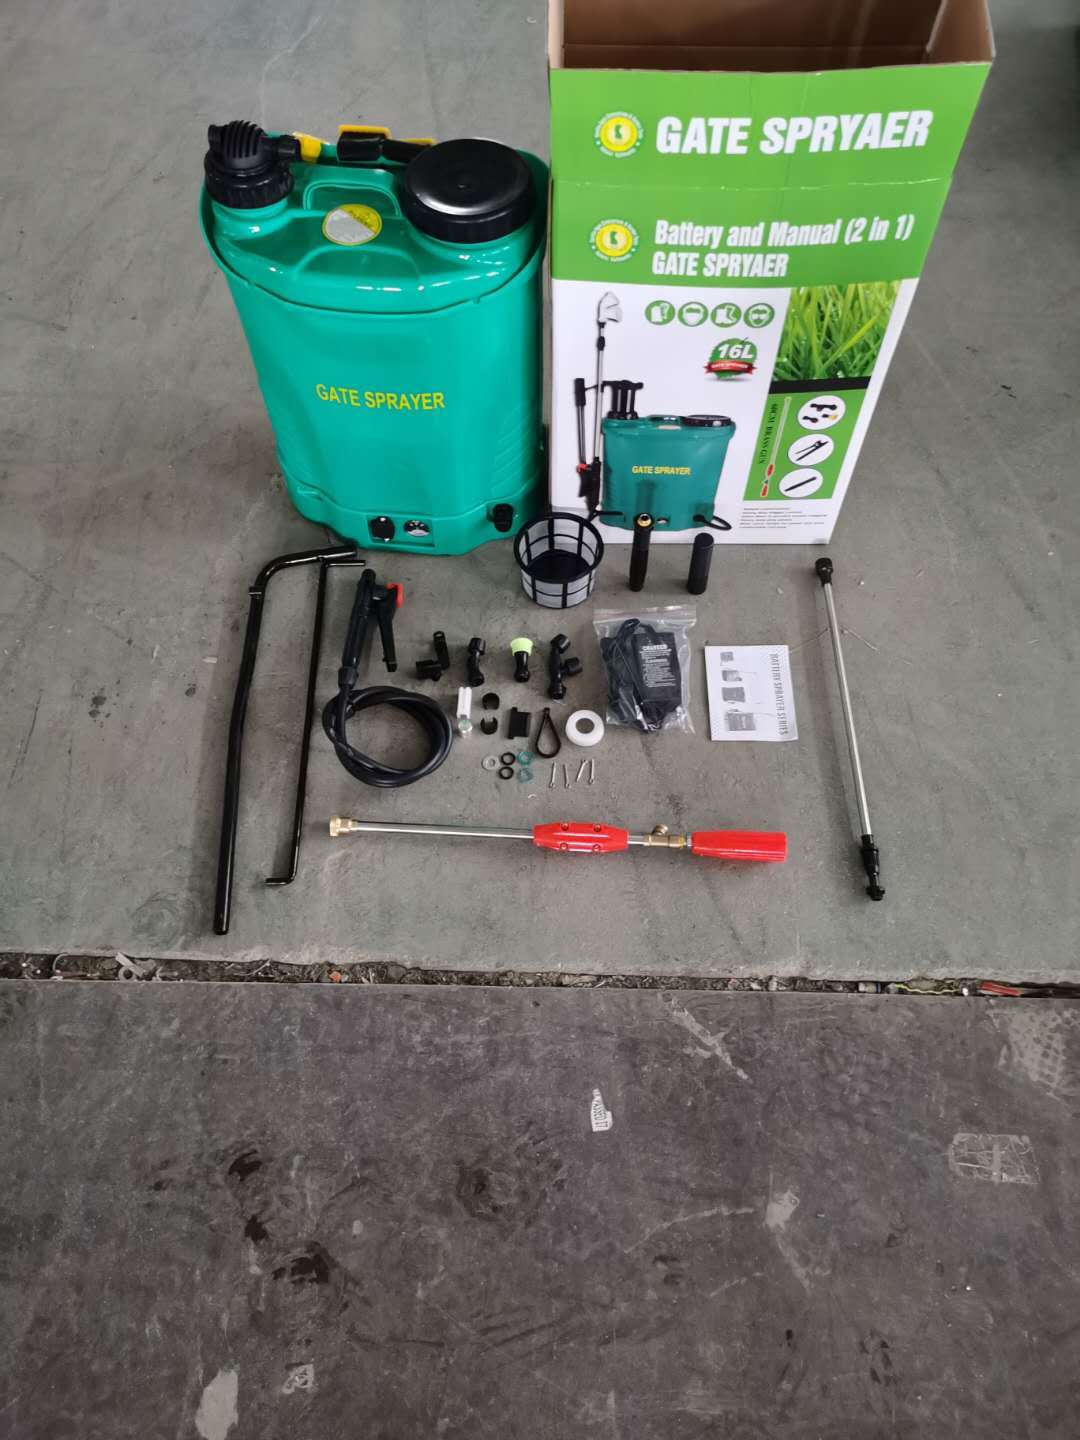 Agricultural Chemical Resistant 16L Hand and Battery 2 in 1 Sprayer GF-16SD-17Z